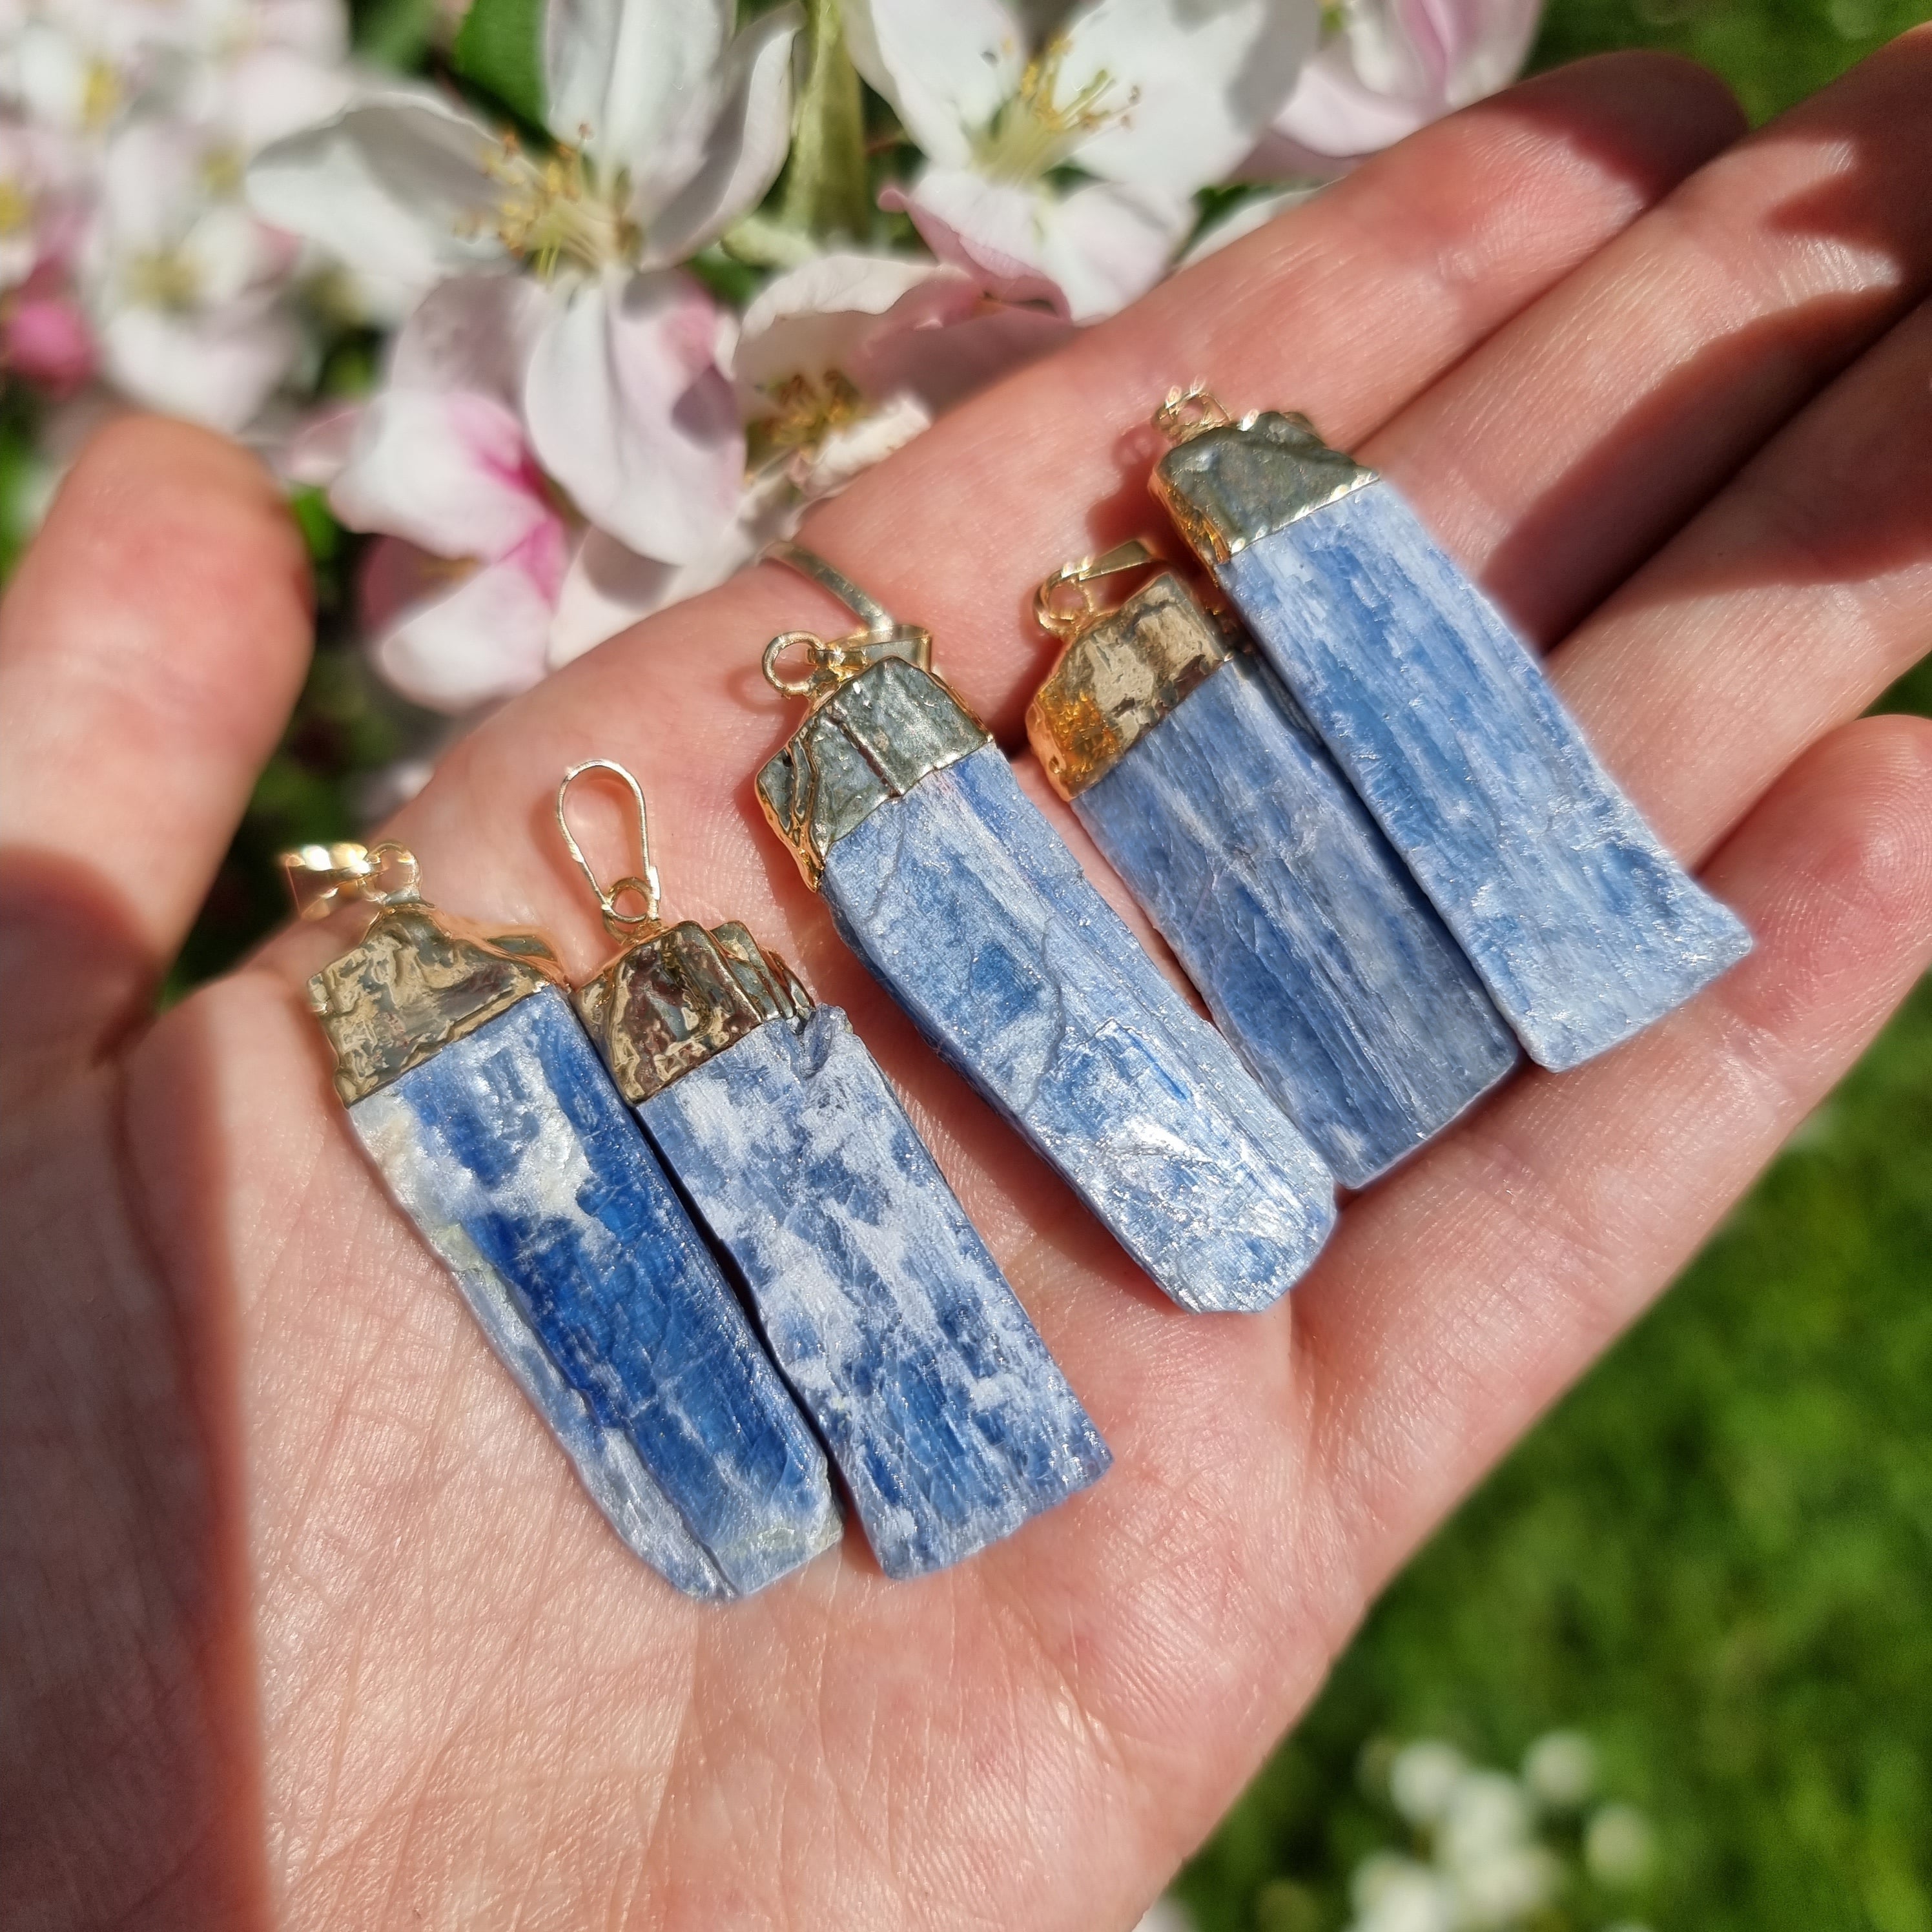 Blue Kyanite and Garnet Necklace by Healing Stones for You